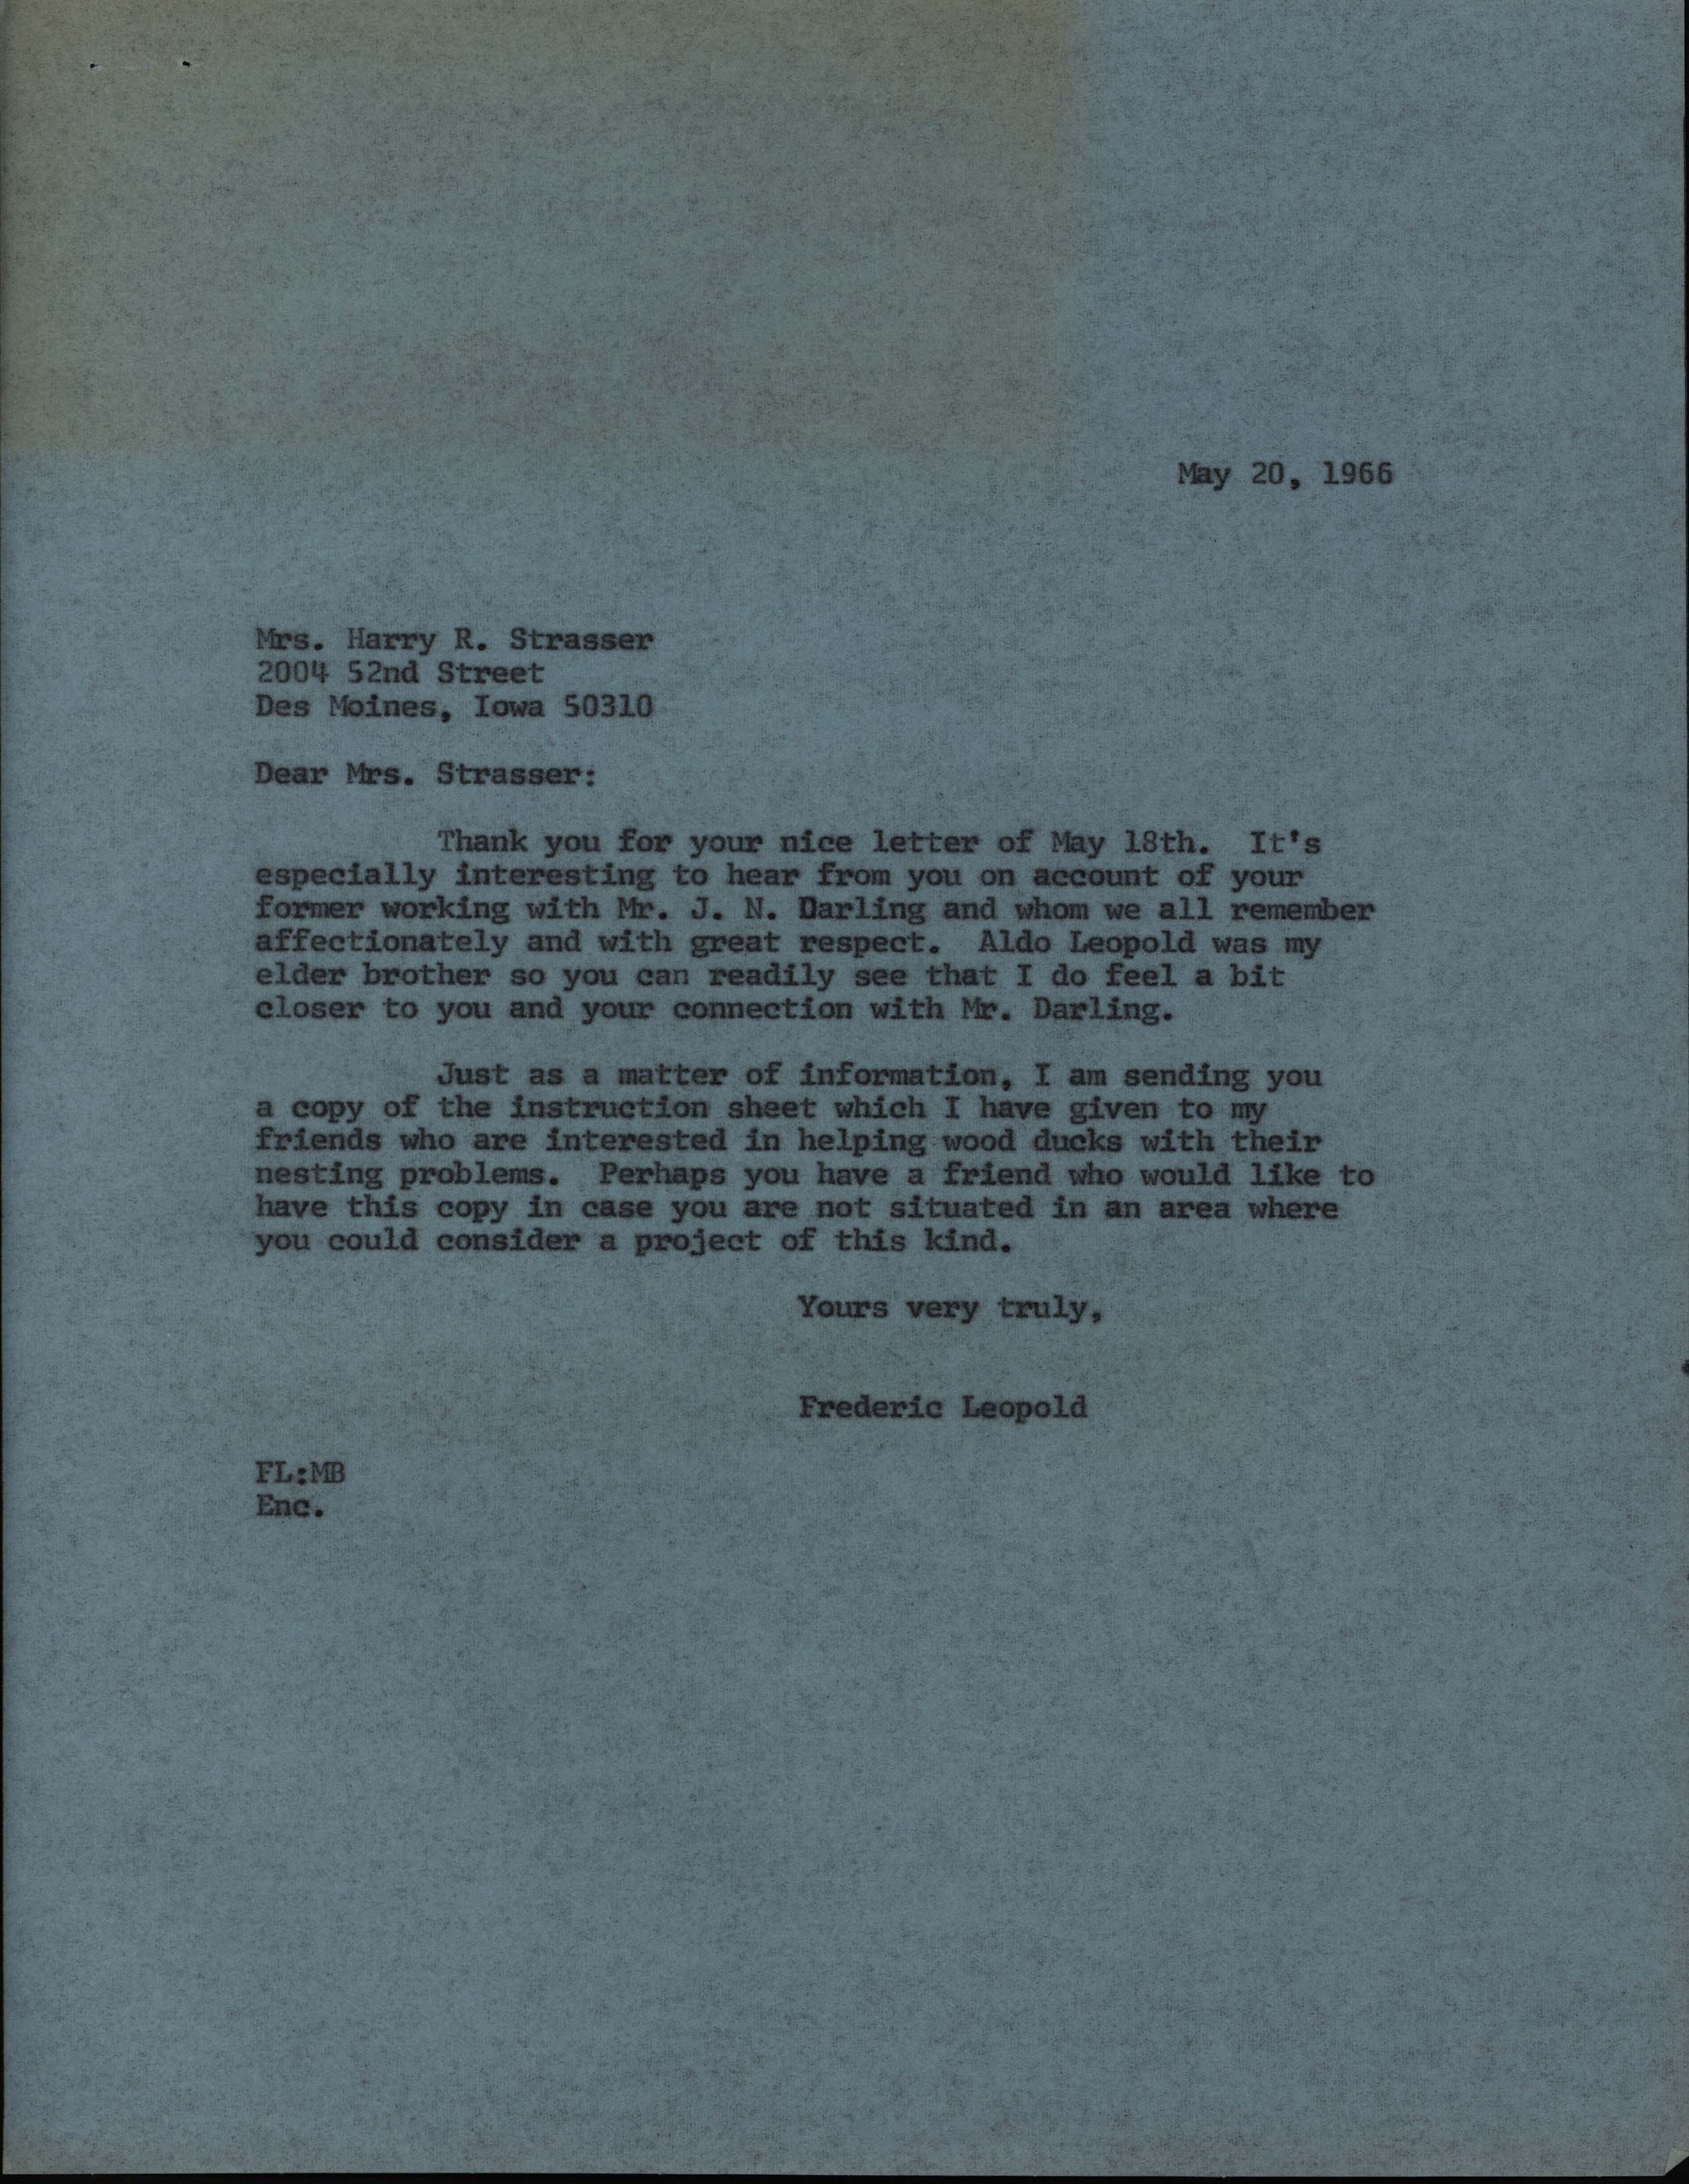 Frederic Leopold letter to Merle Strasser regarding Wood Ducks and Jay N. Darling, May 20, 1966